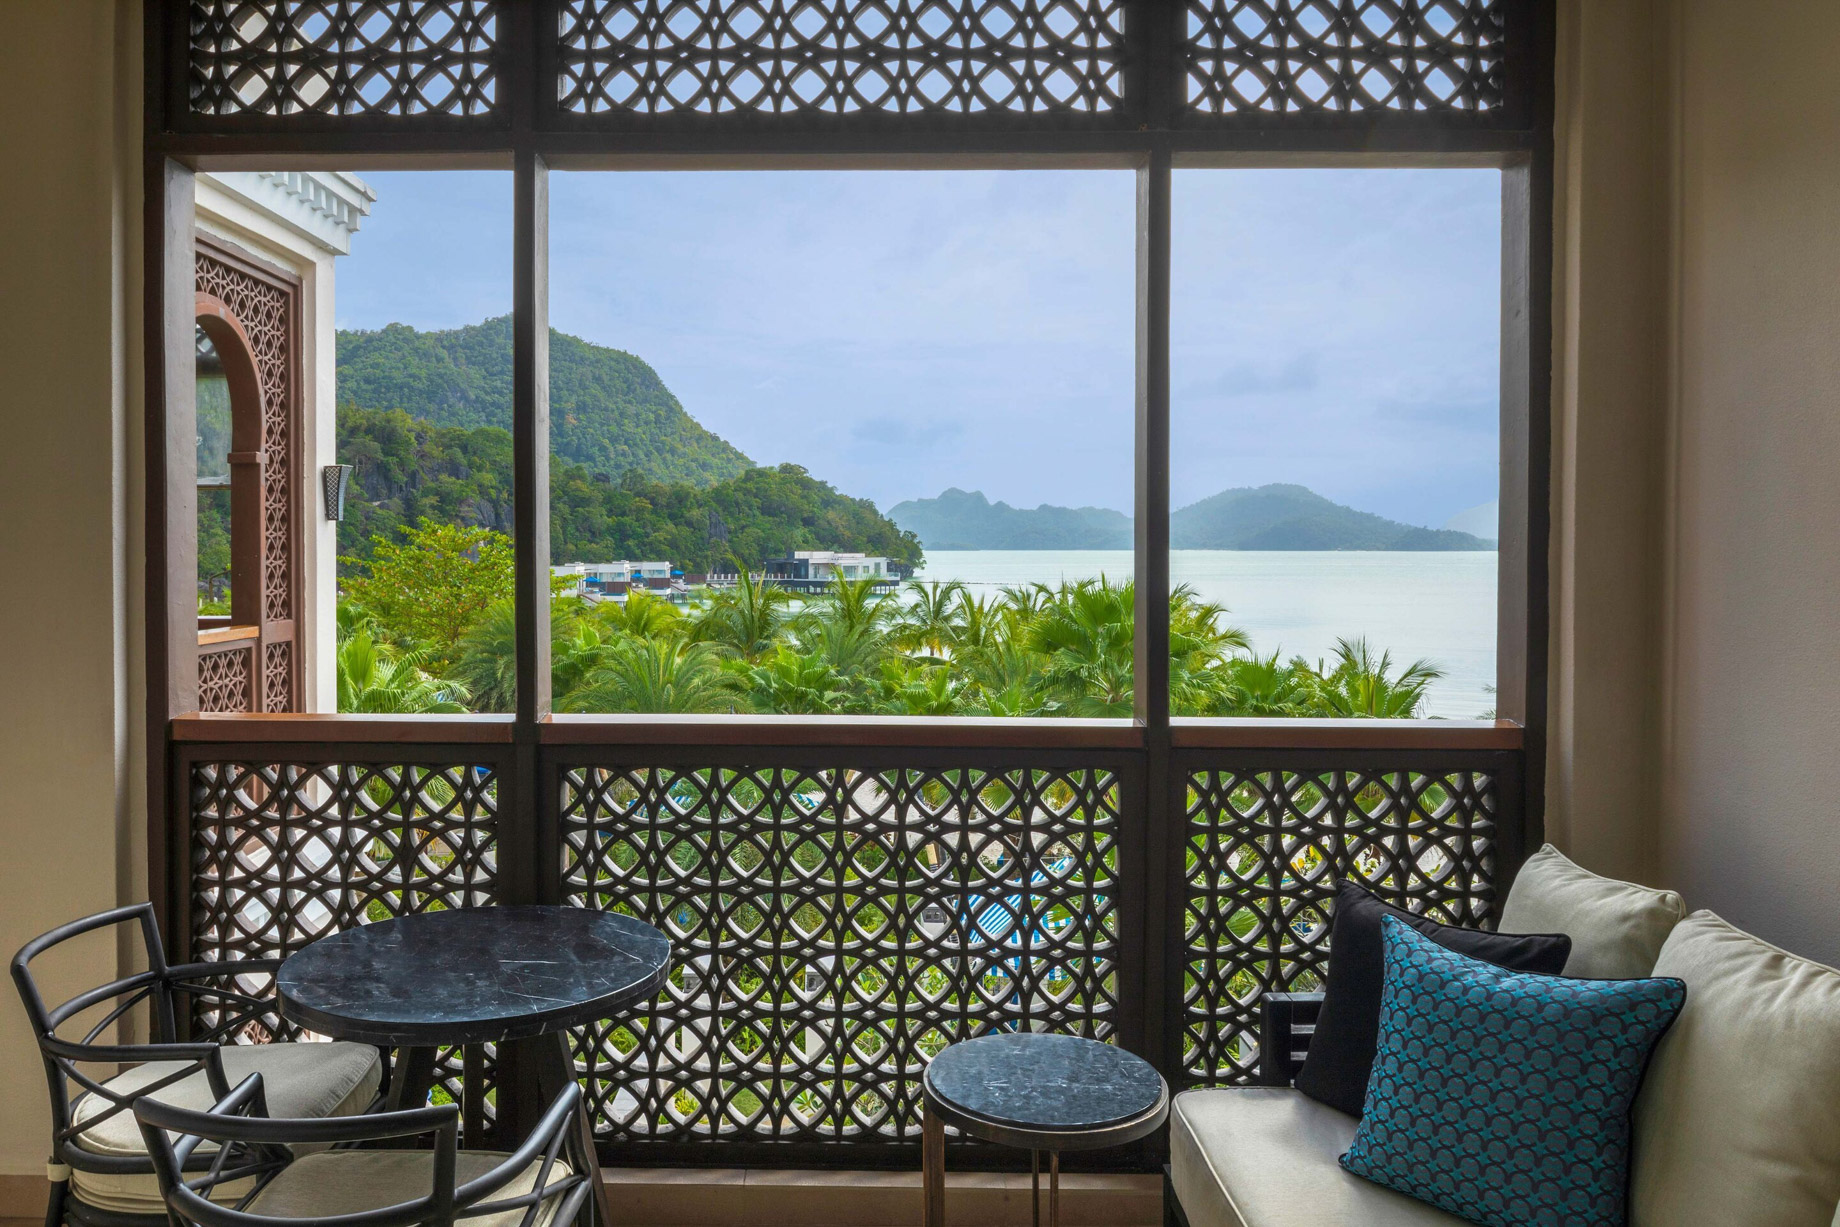 The St. Regis Langkawi Resort - Langkawi, Malaysia - Sea View Guest Room Balcony